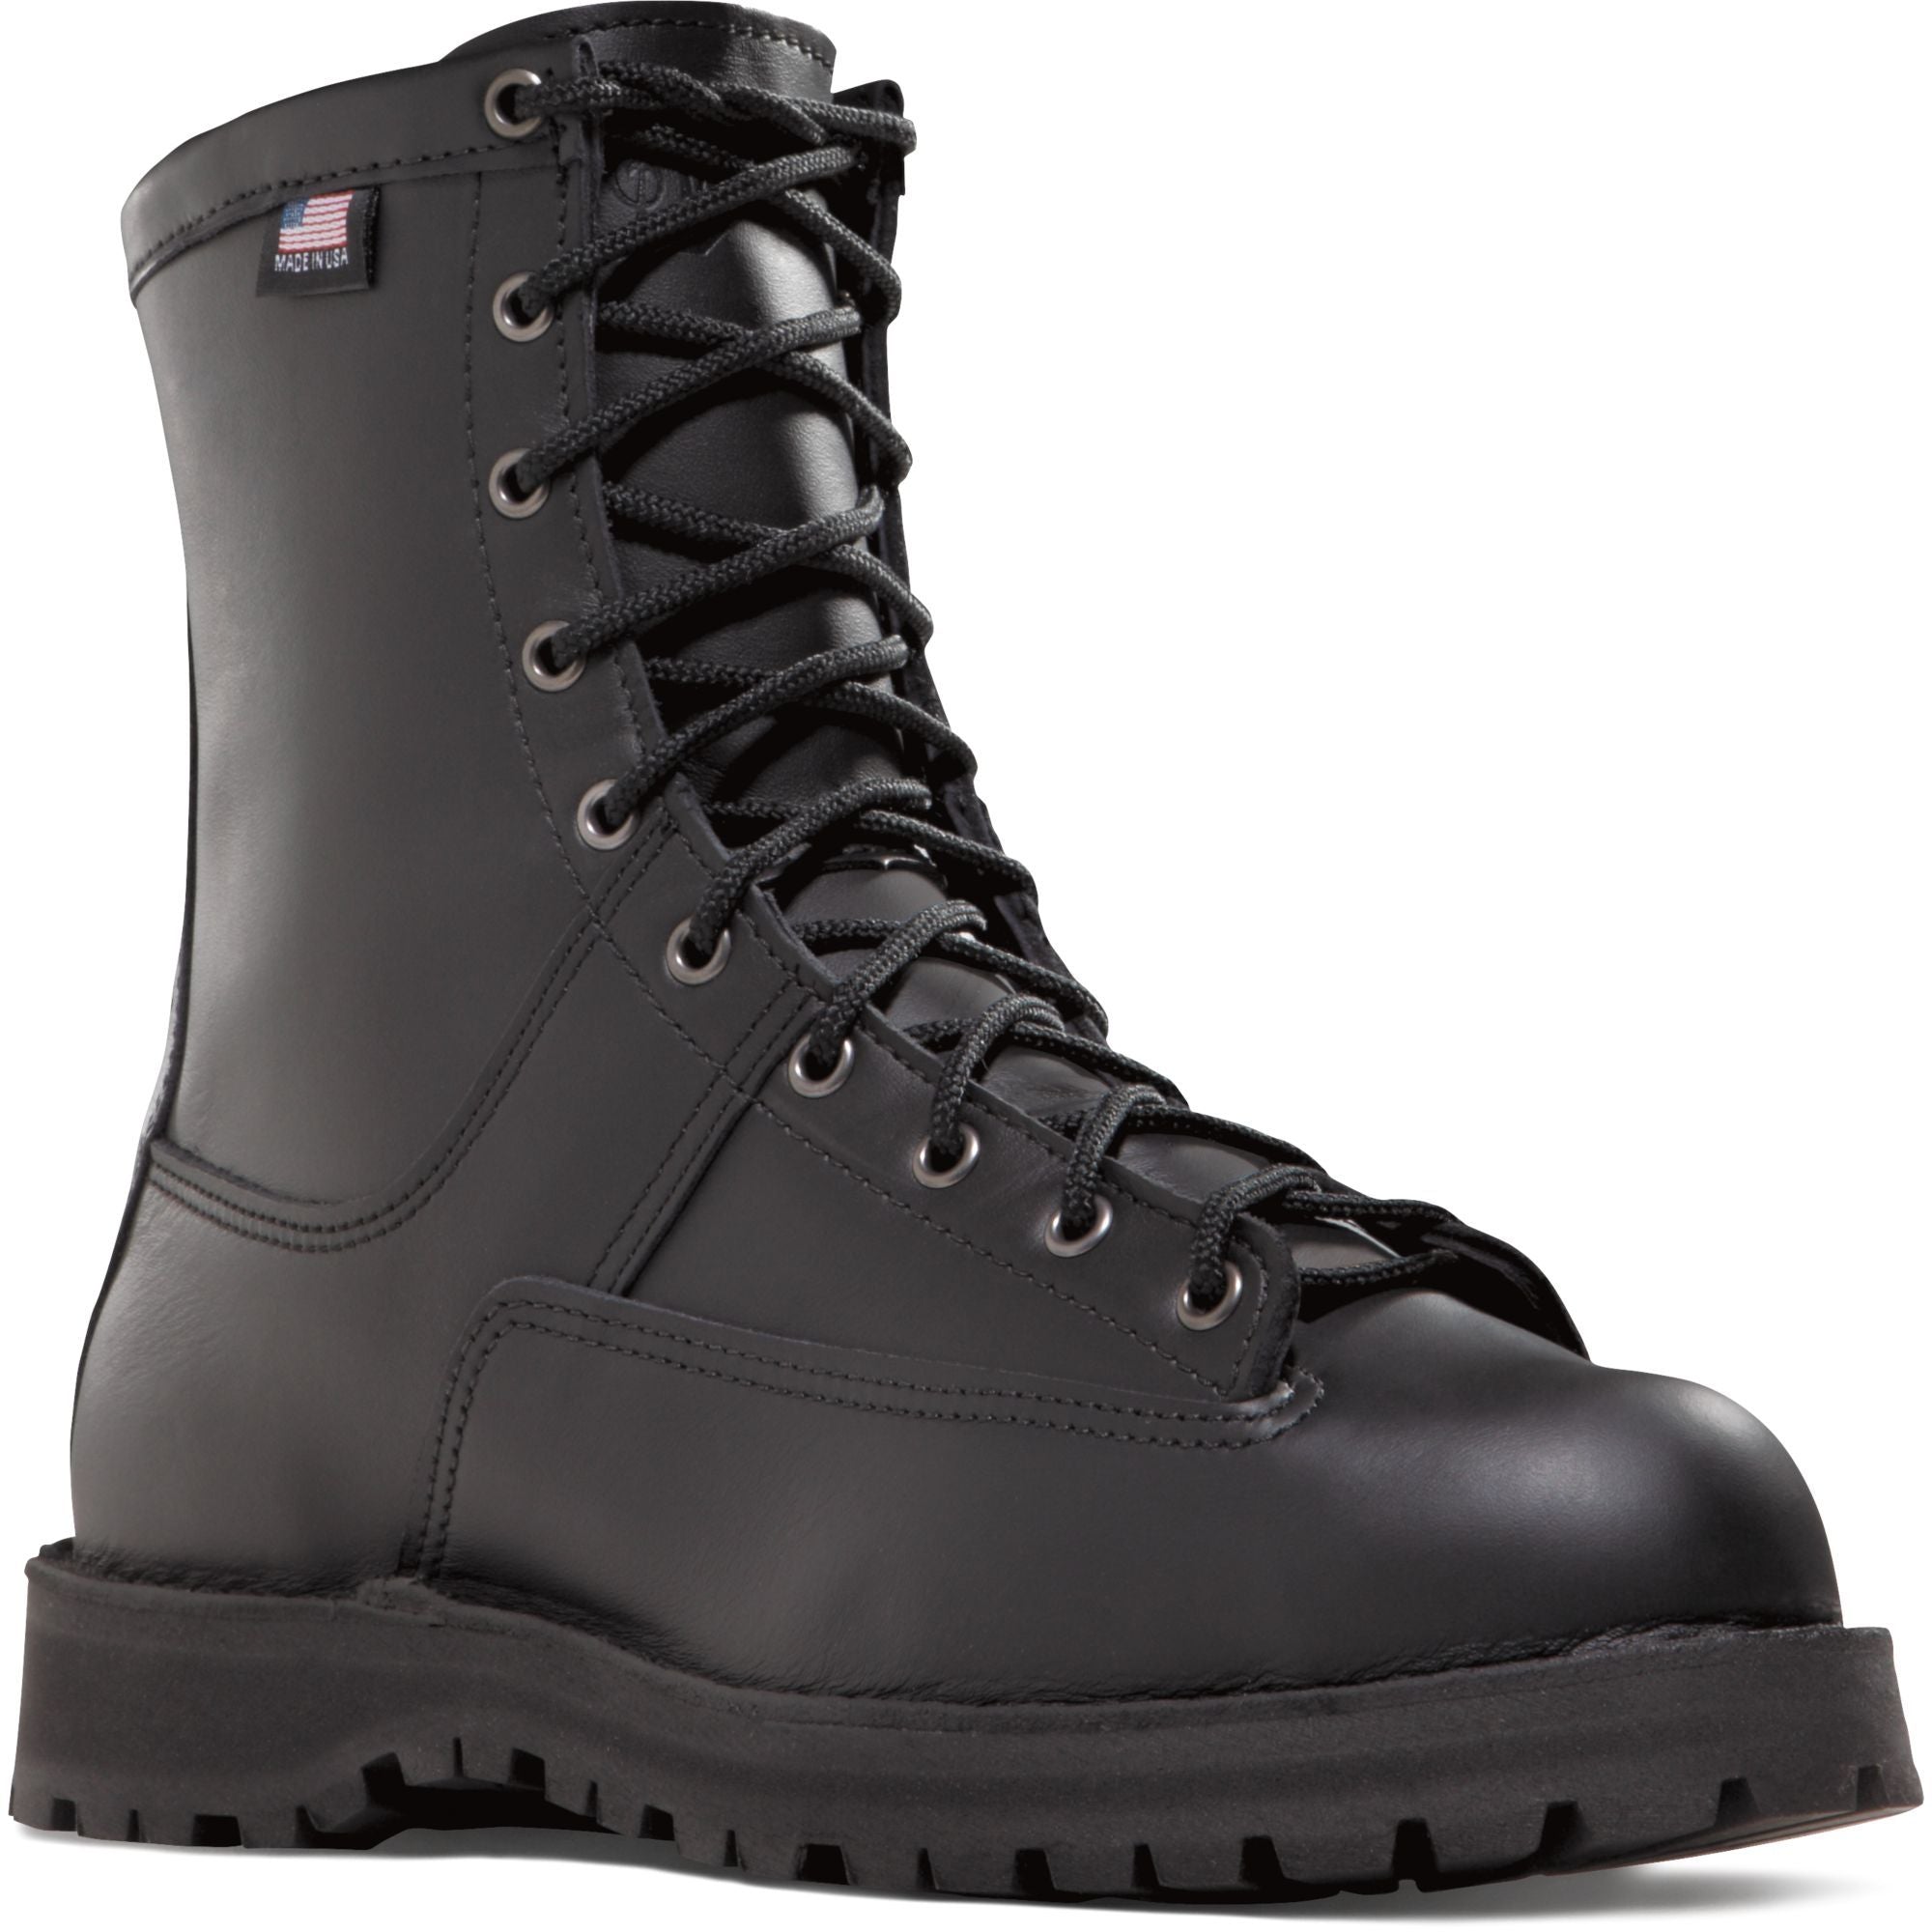 Danner Men's Recon USA Made 8" Insulated WP Duty Boot - Black - 69410 7 / Medium / Black - Overlook Boots